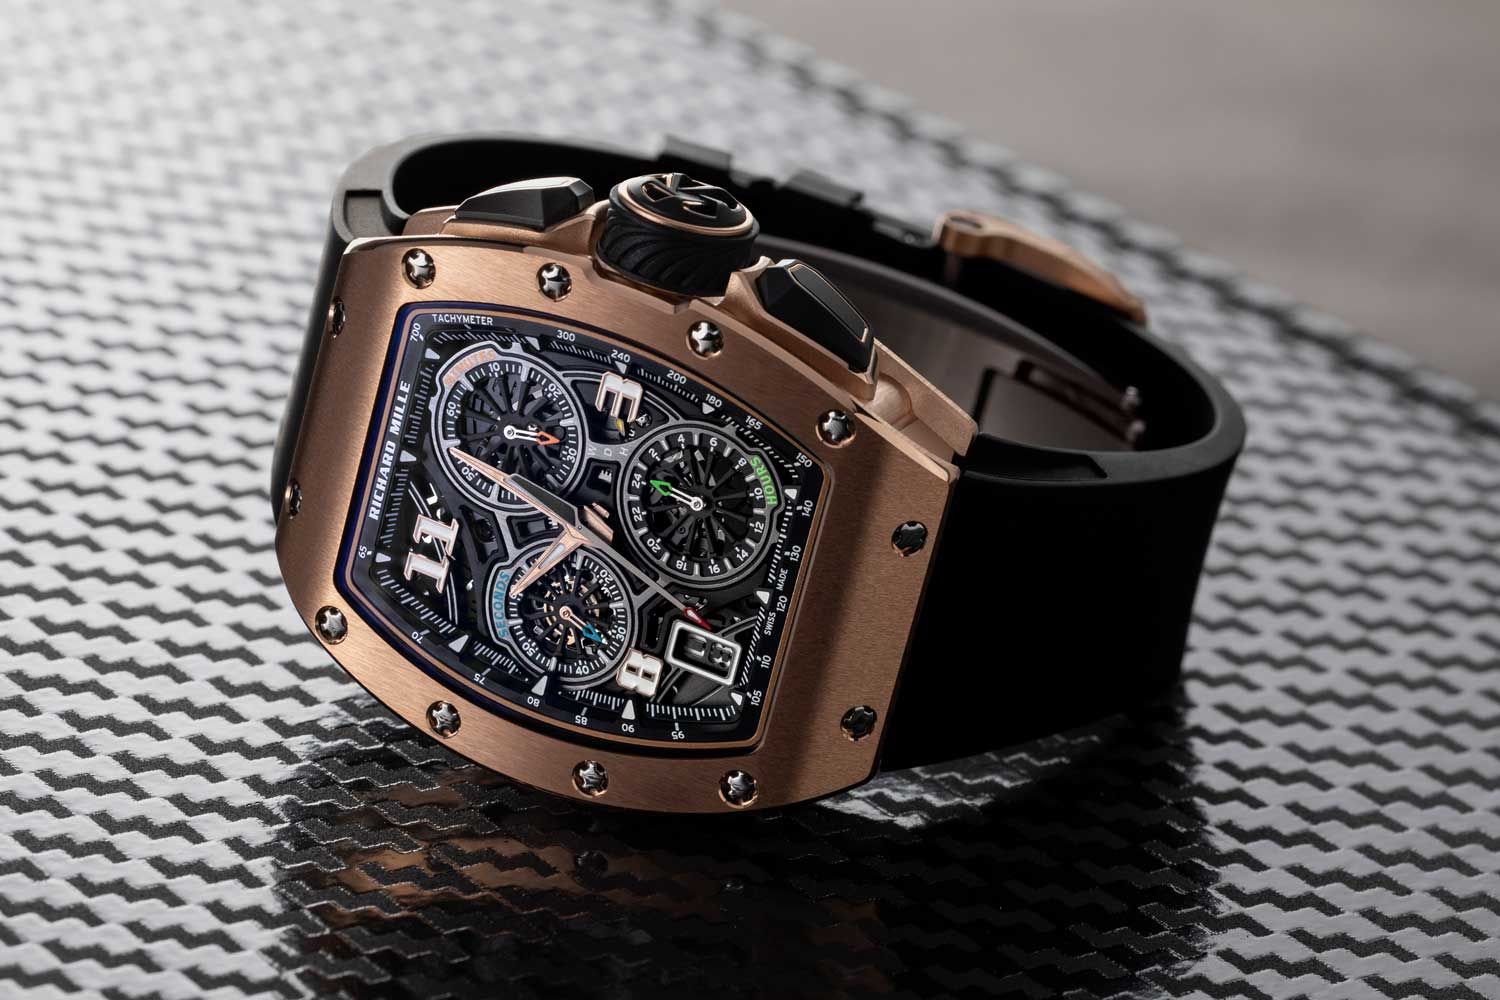 Launched in late 2020, the RM 72-01 looks like your typical hyper dynamic Richard Mille watch that radiates futurist machine tech energy from 100 meters (©Revolution)